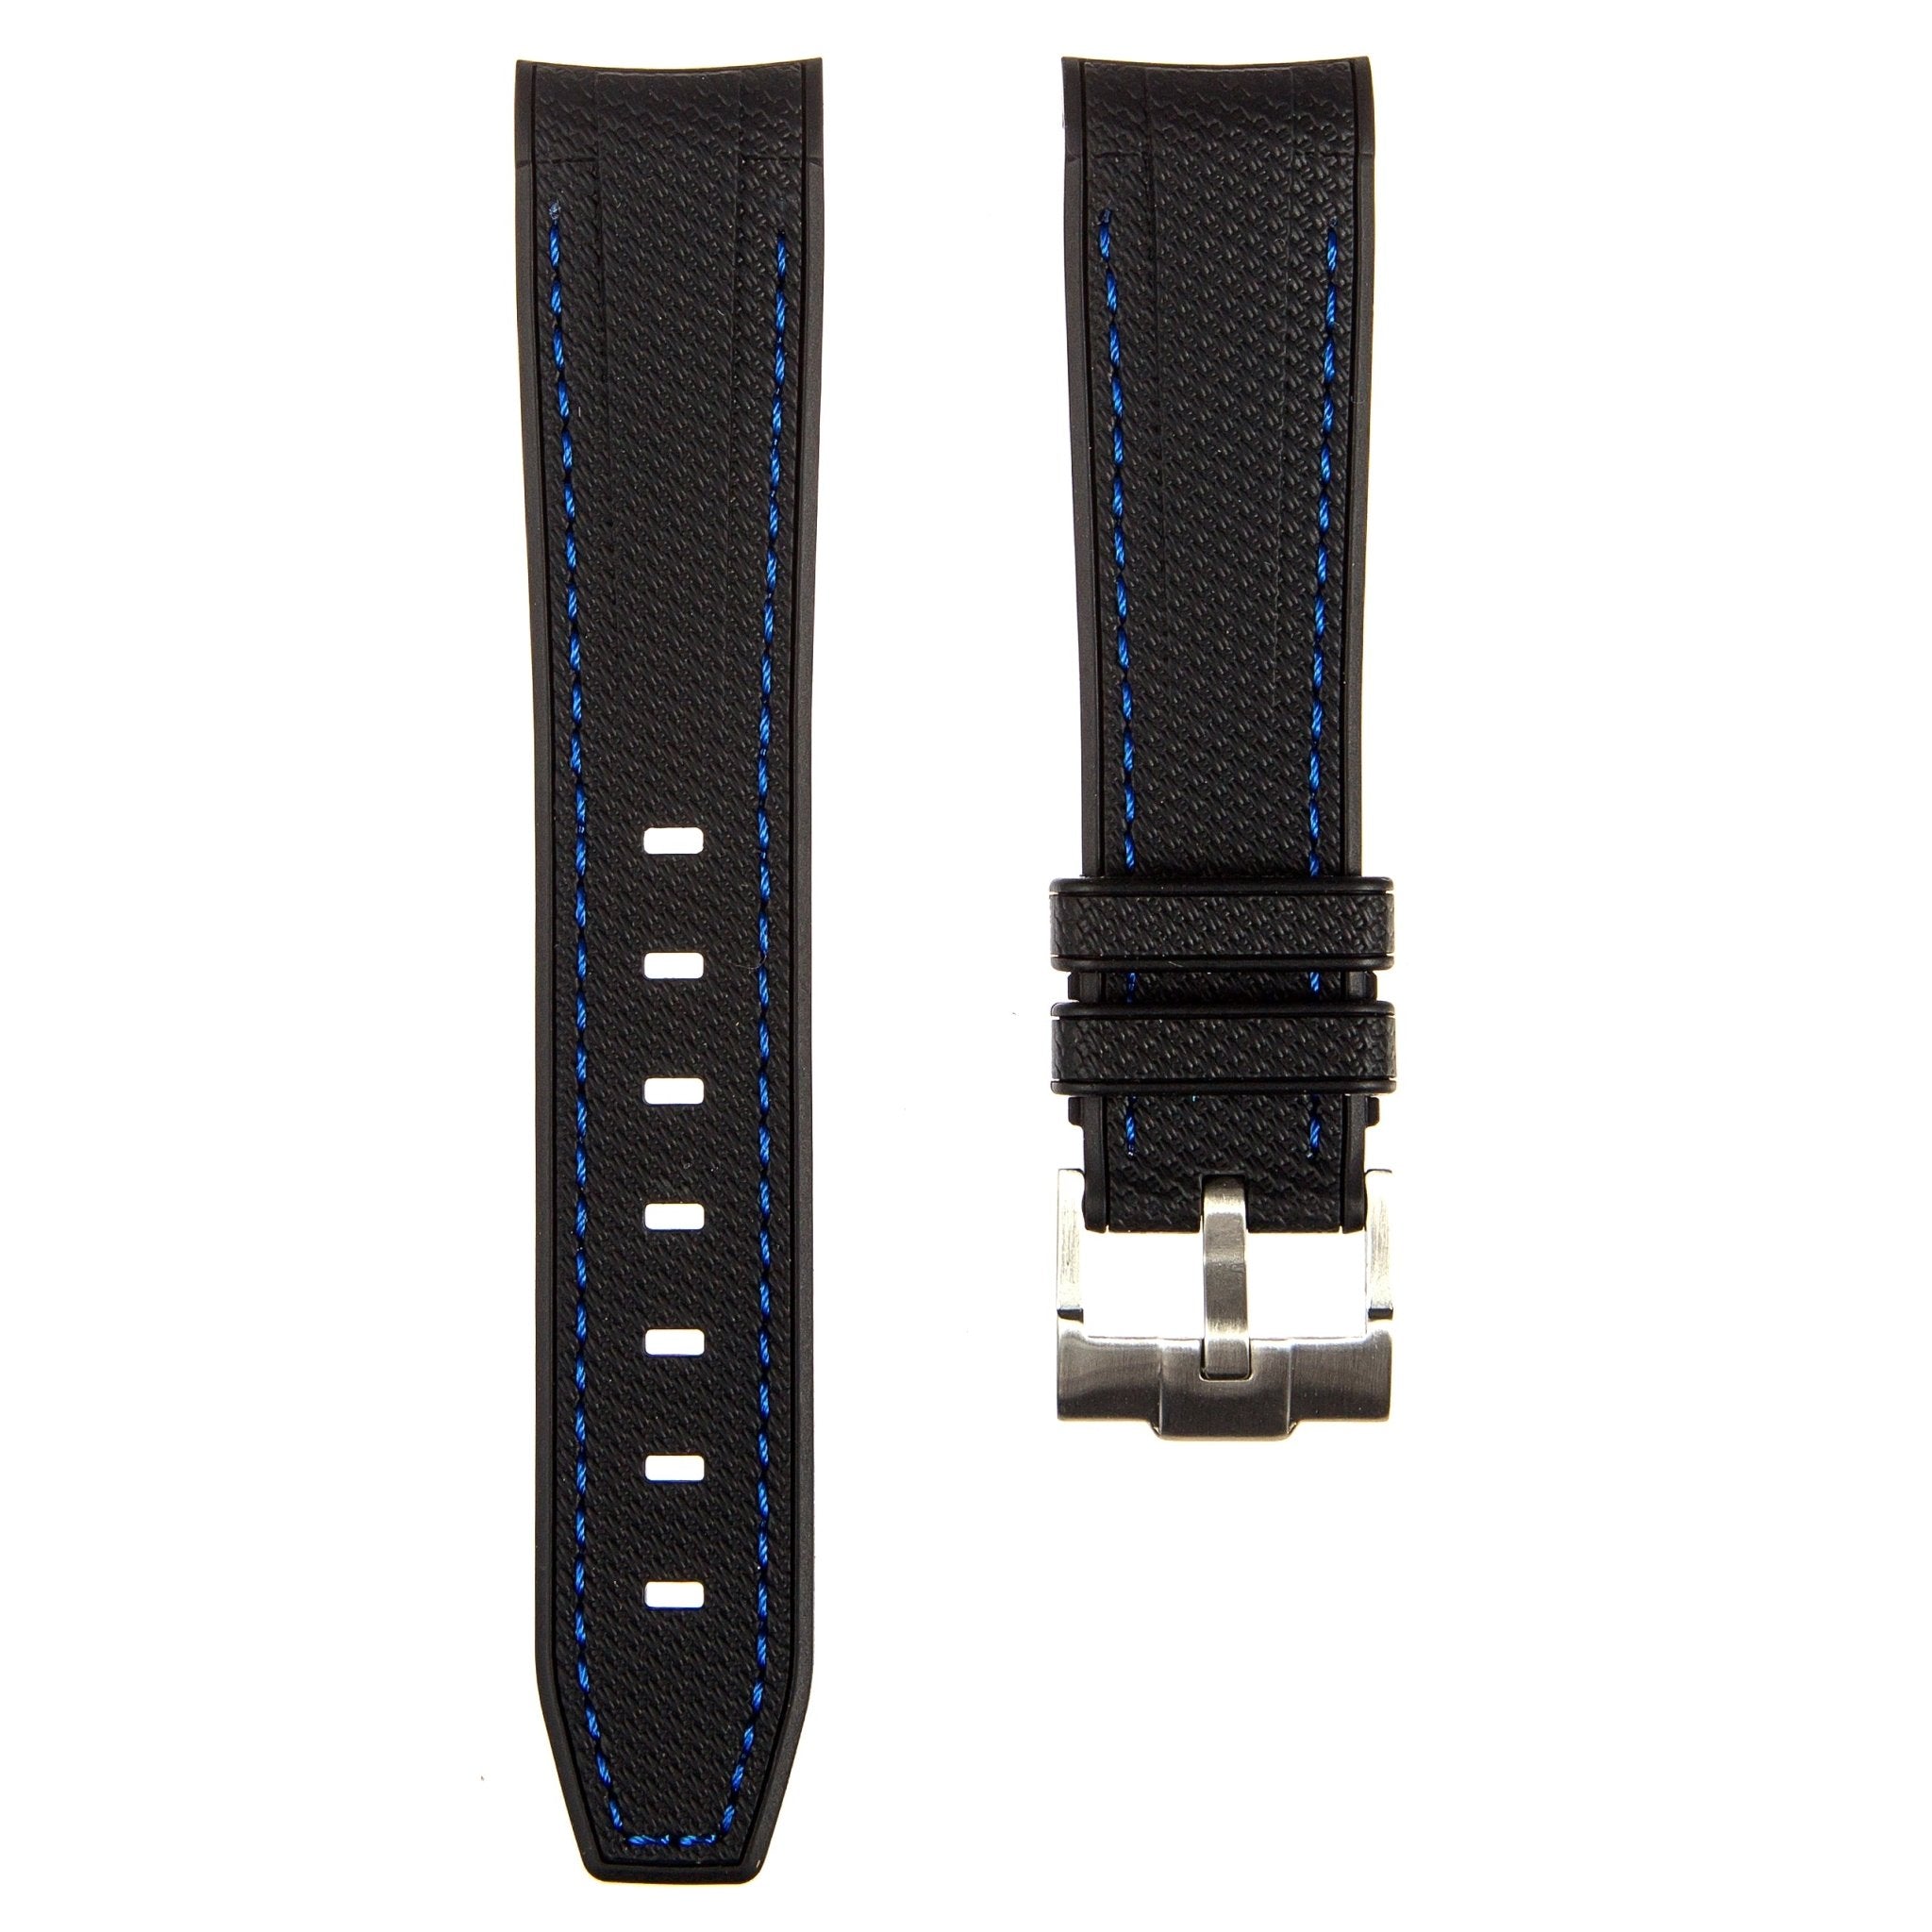 Textured Curved End Premium Silicone Strap - Compatible with Omega Moonwatch - Black with Blue Stitch (2405) -StrapSeeker